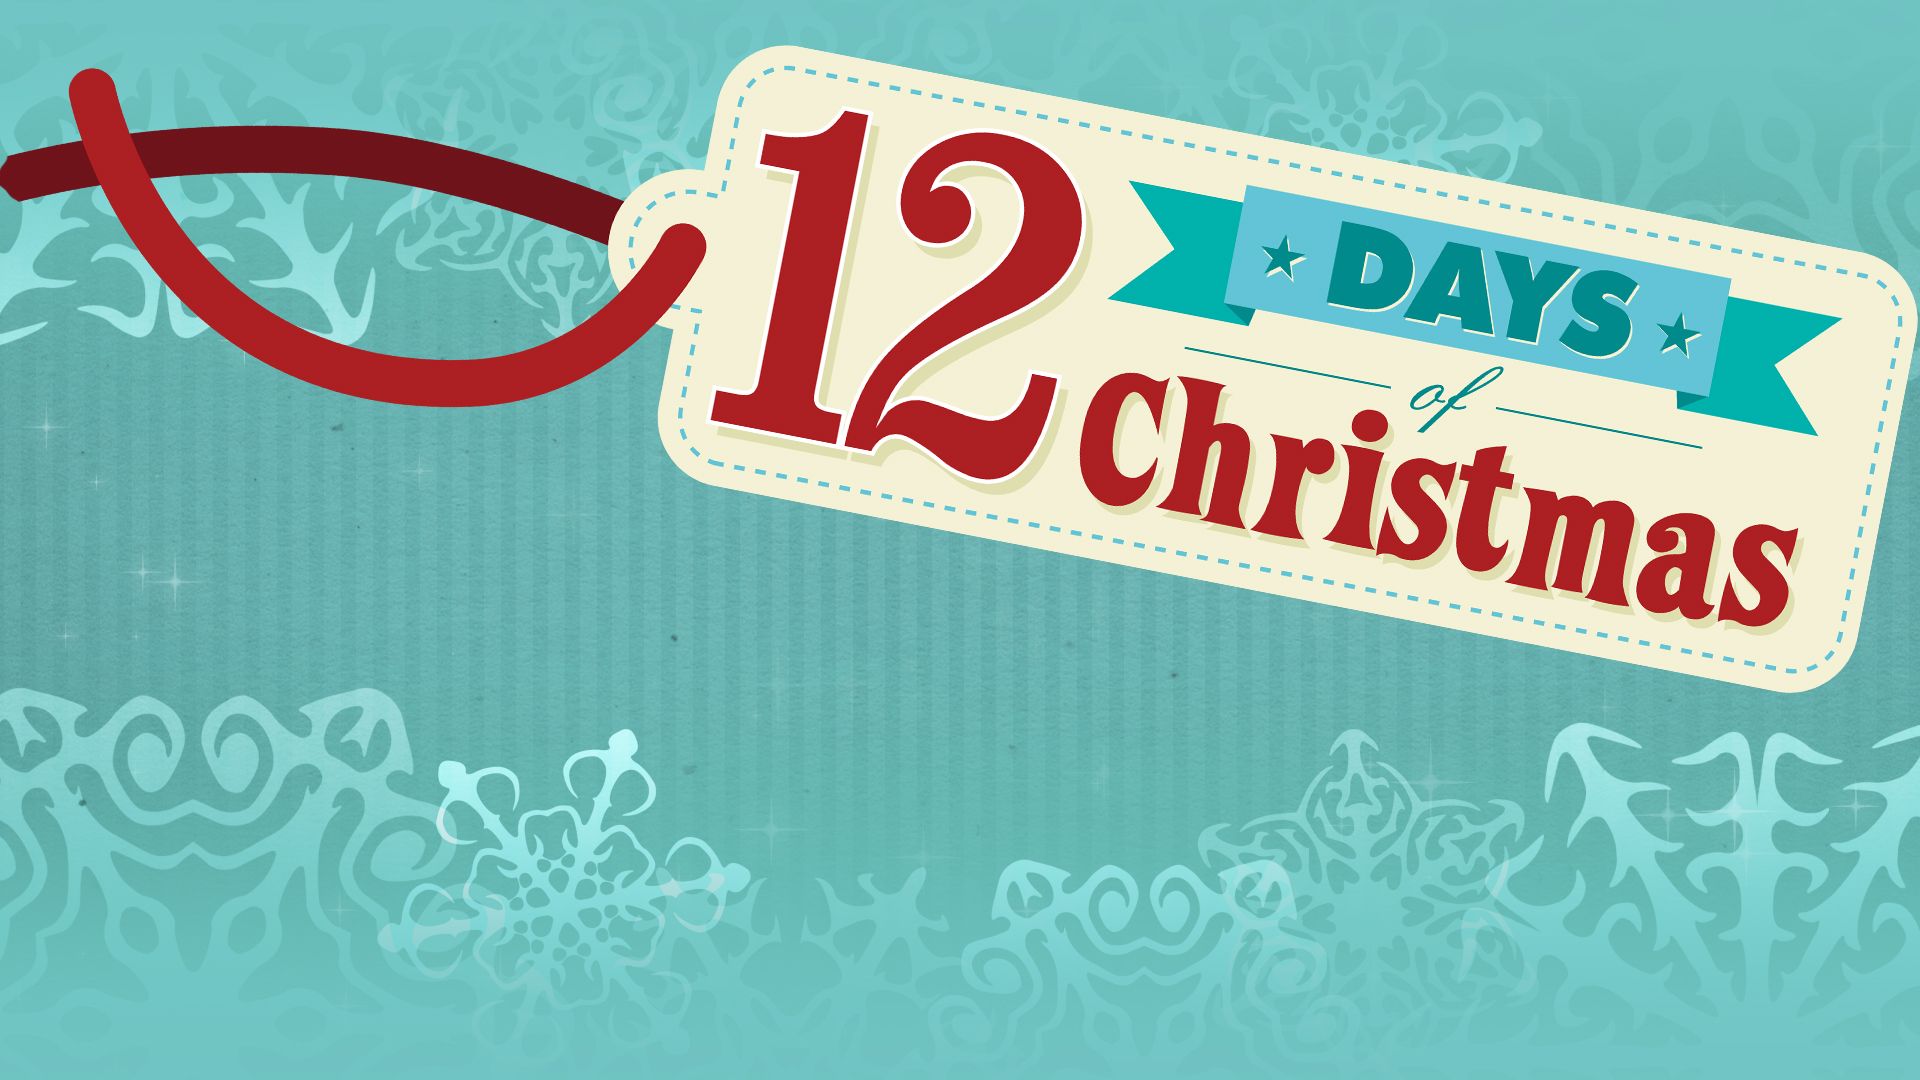 Days of Christmas Wallpaper Free 12 Days of Christmas Background